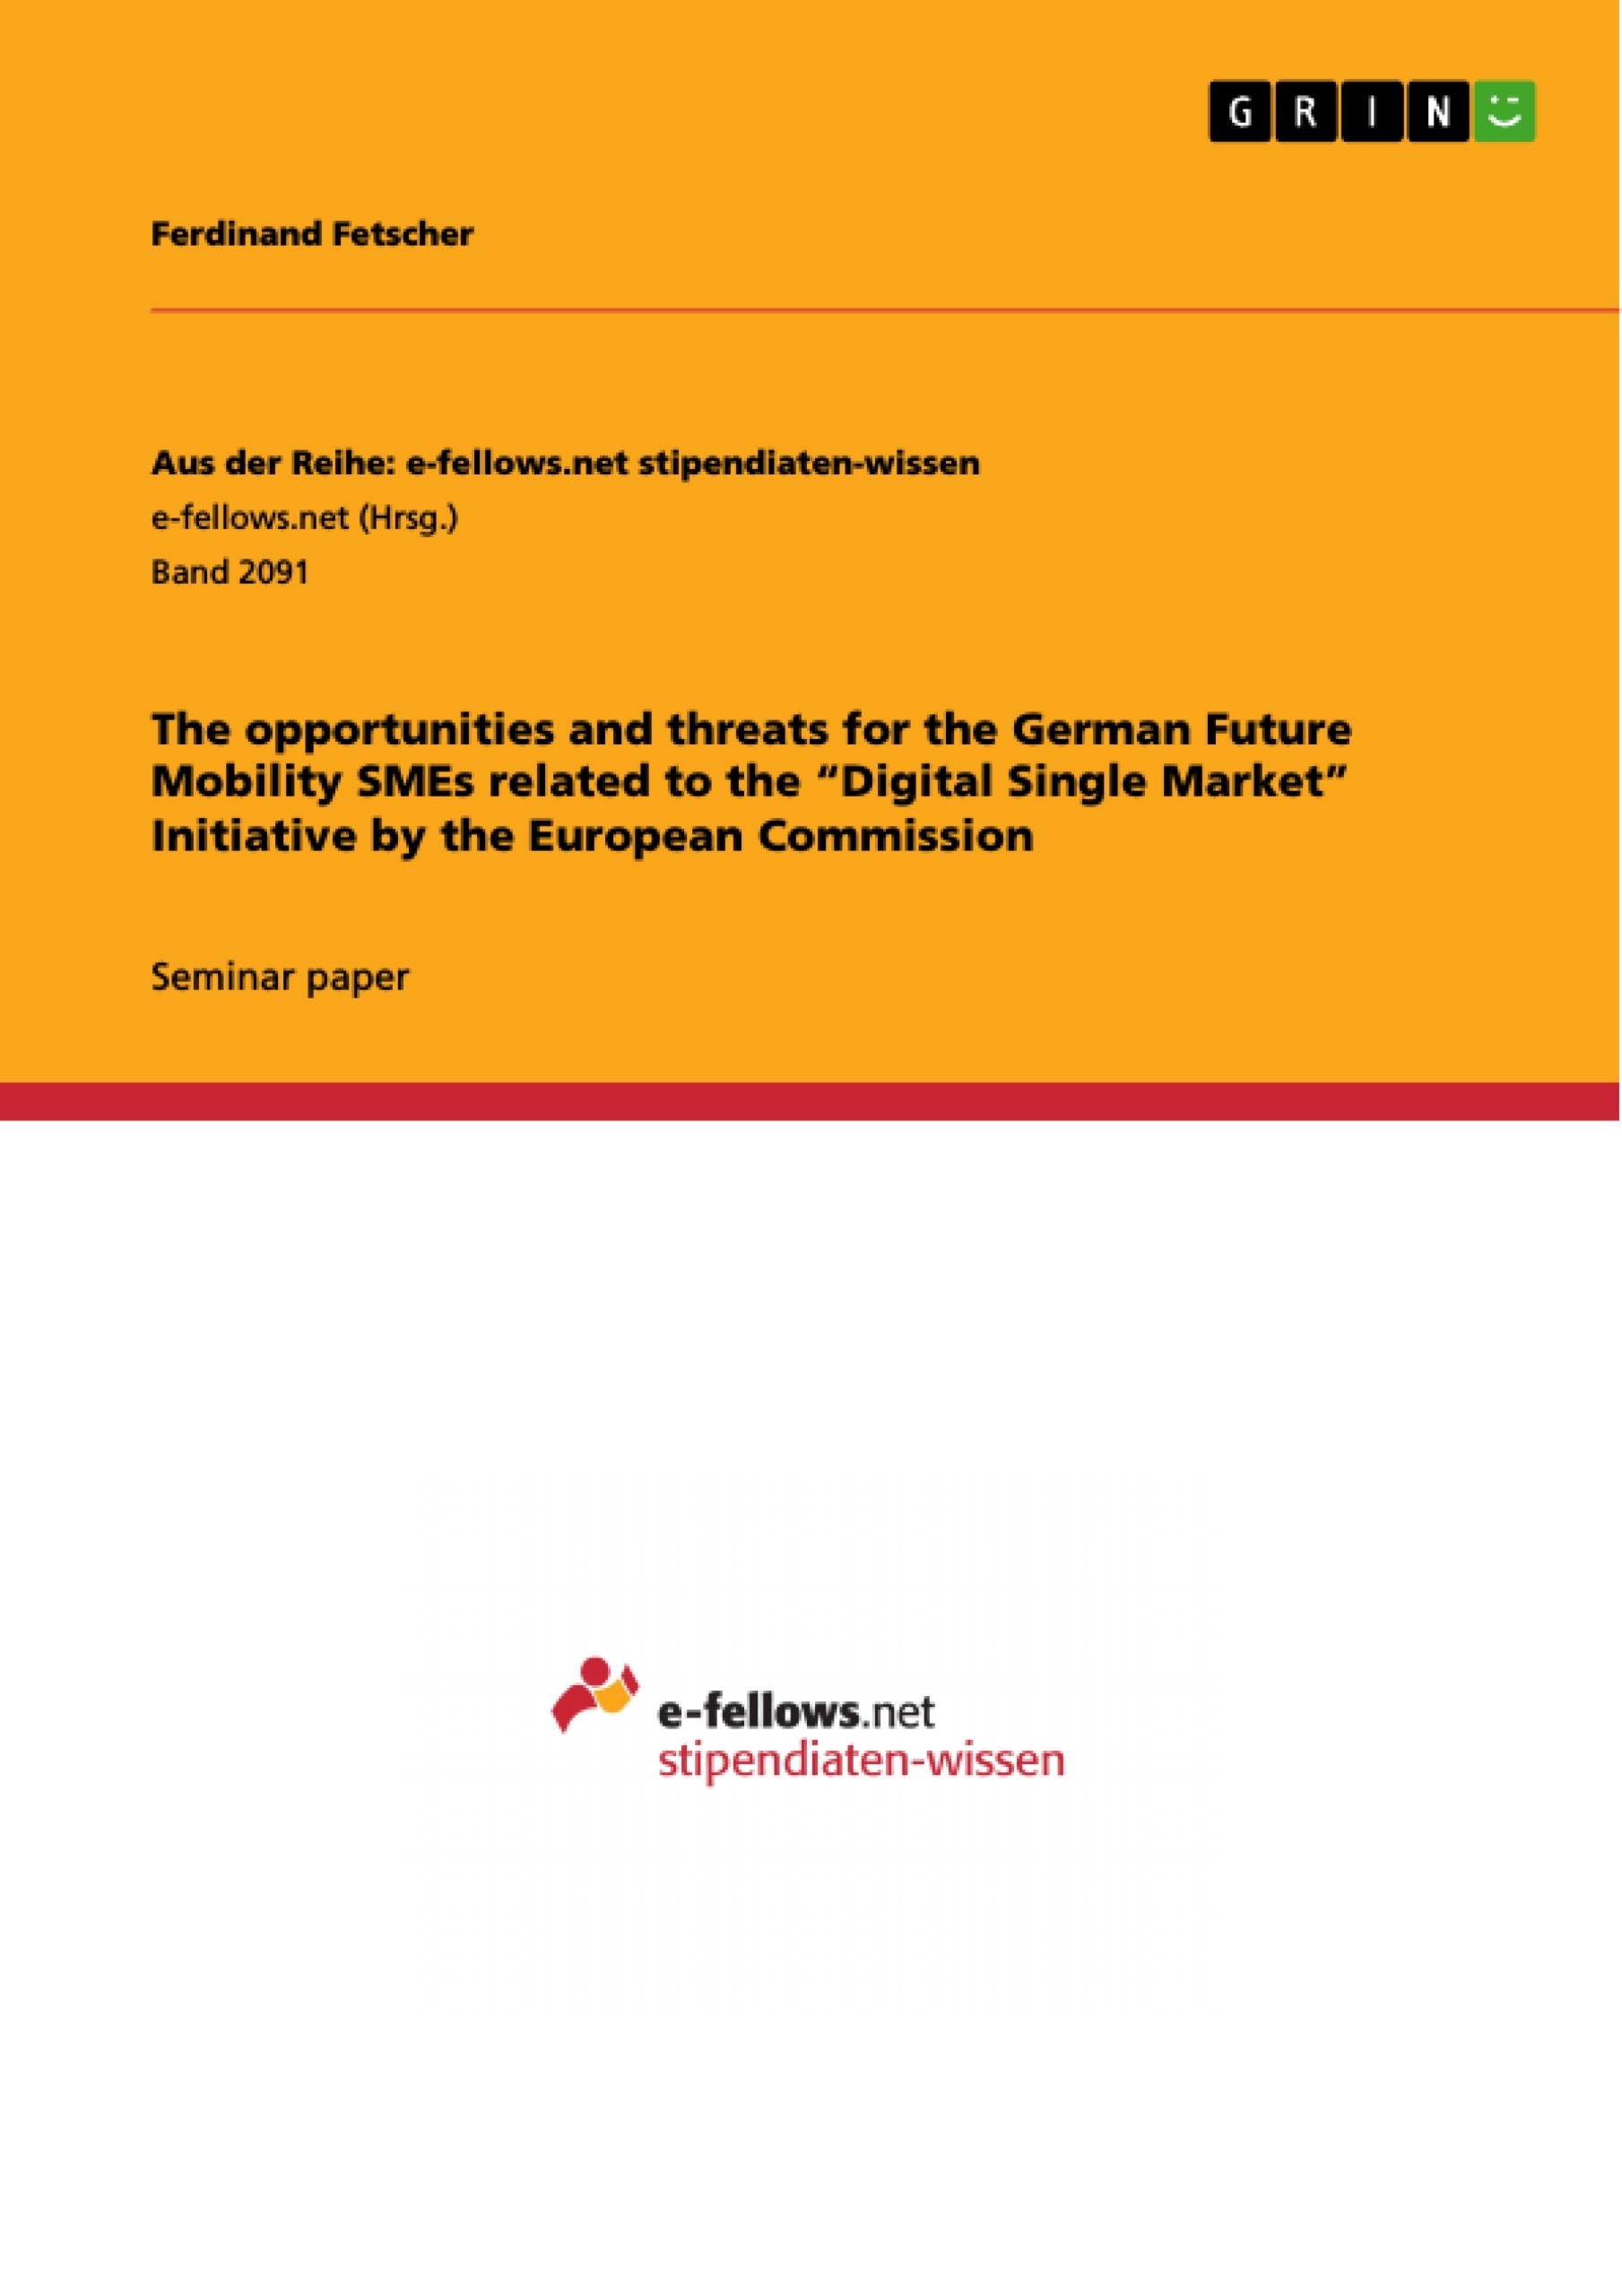 Title: The opportunities and threats for the German Future Mobility SMEs related to the “Digital Single Market” Initiative by the European Commission